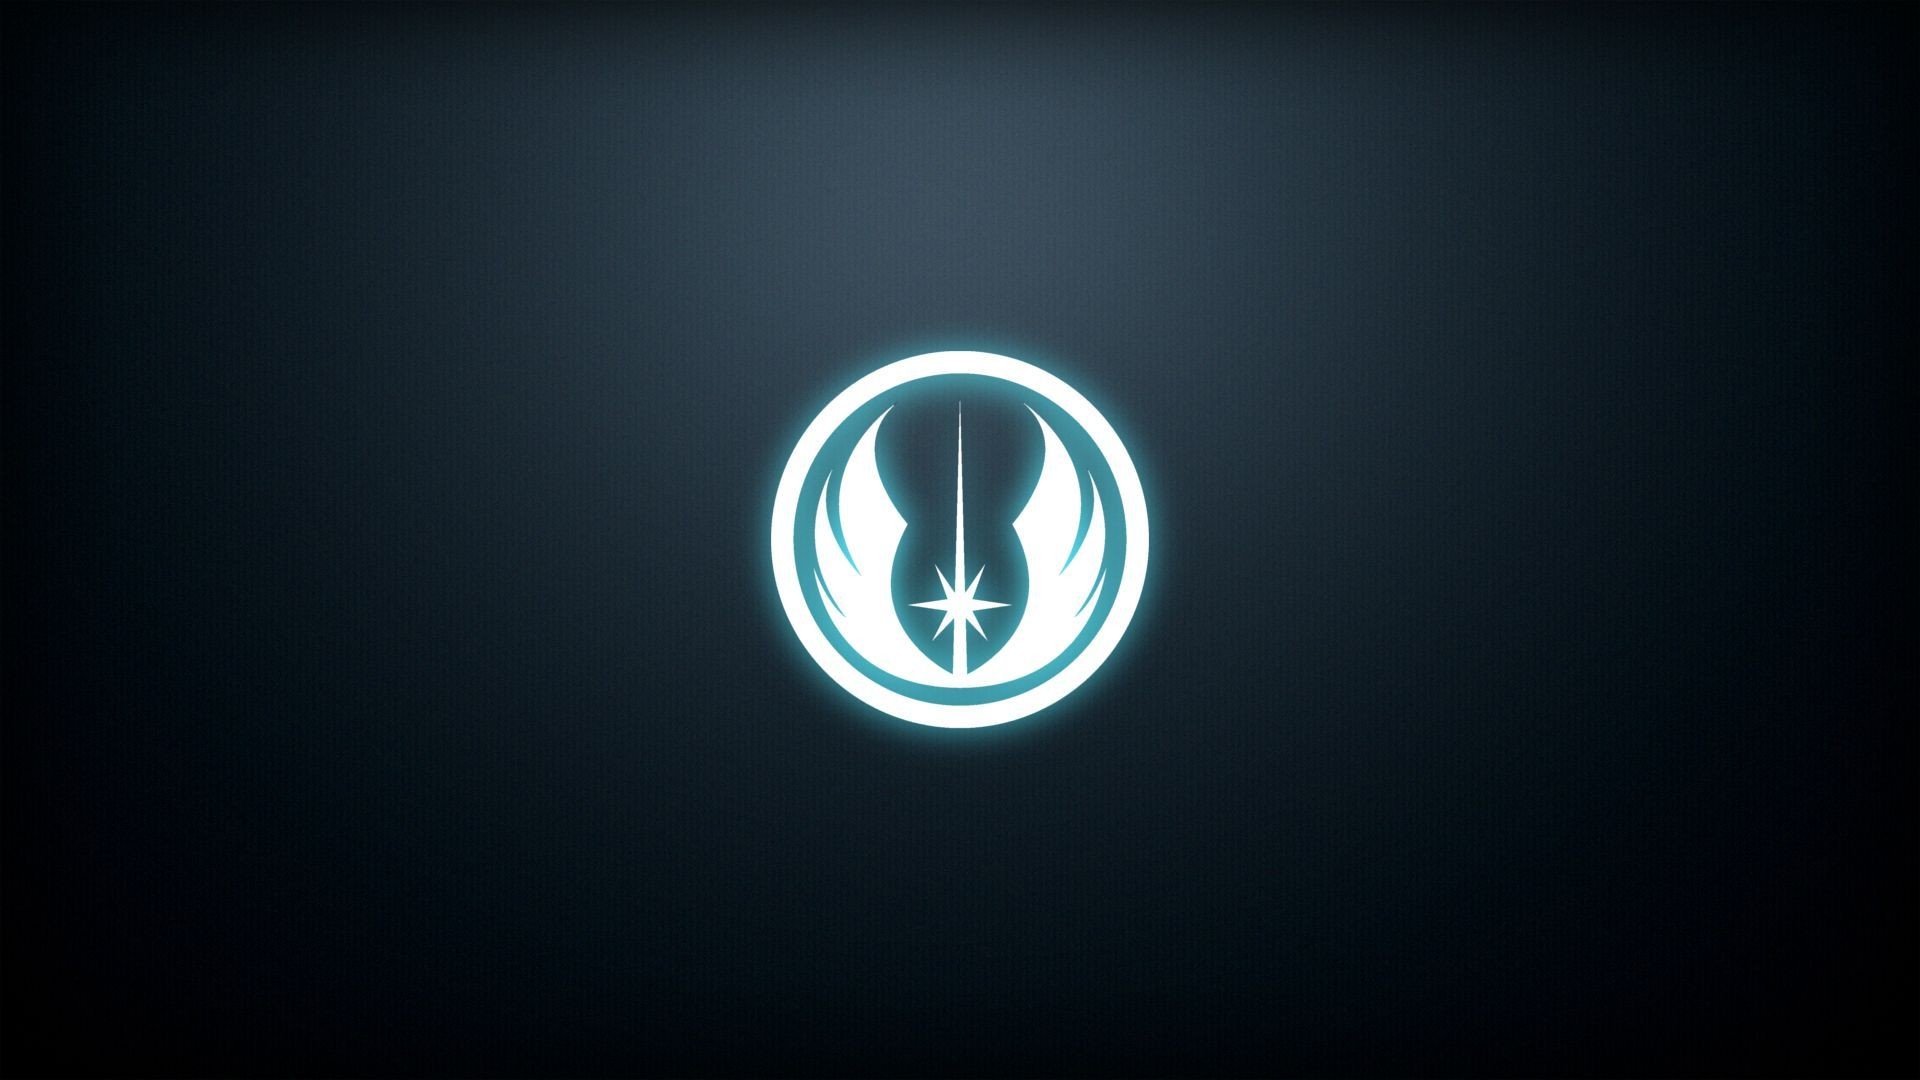 A wallpaper you guys might like. The Jedi Order emblem. Ill do a